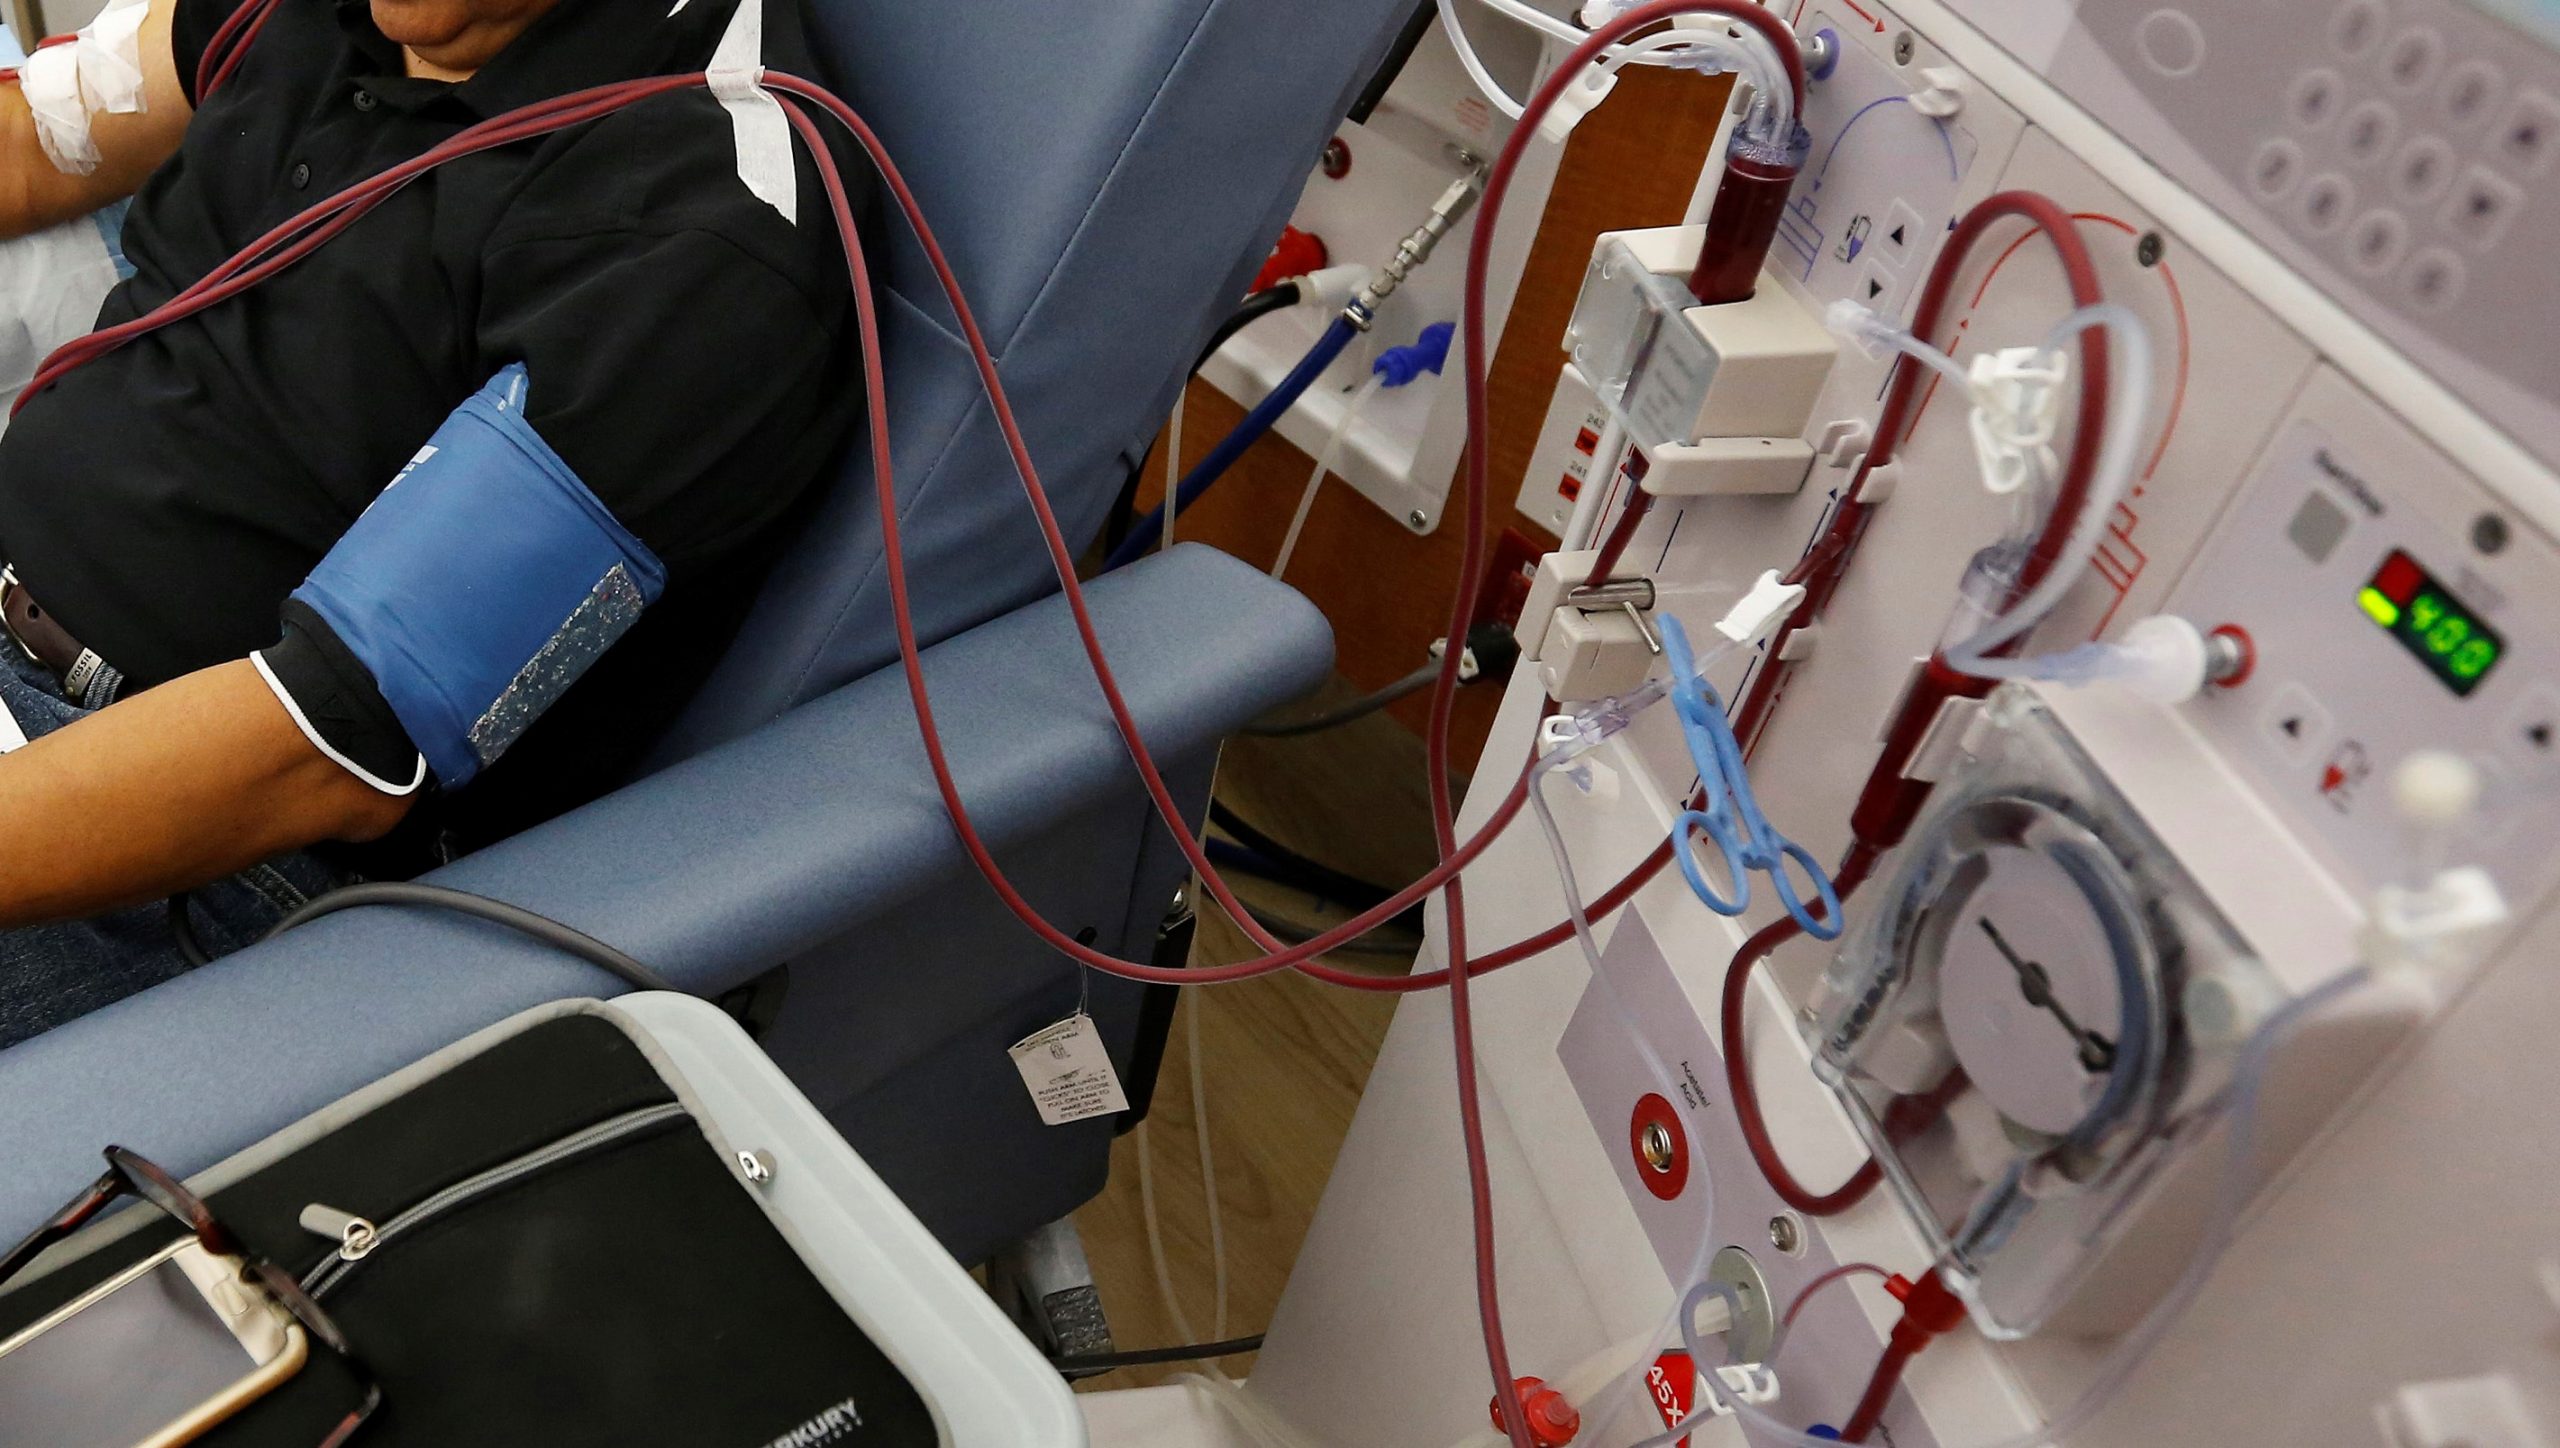 Mortality Rate Of Dialysis Patients, Due Covid-19, Is Described As Extremely Worrisome